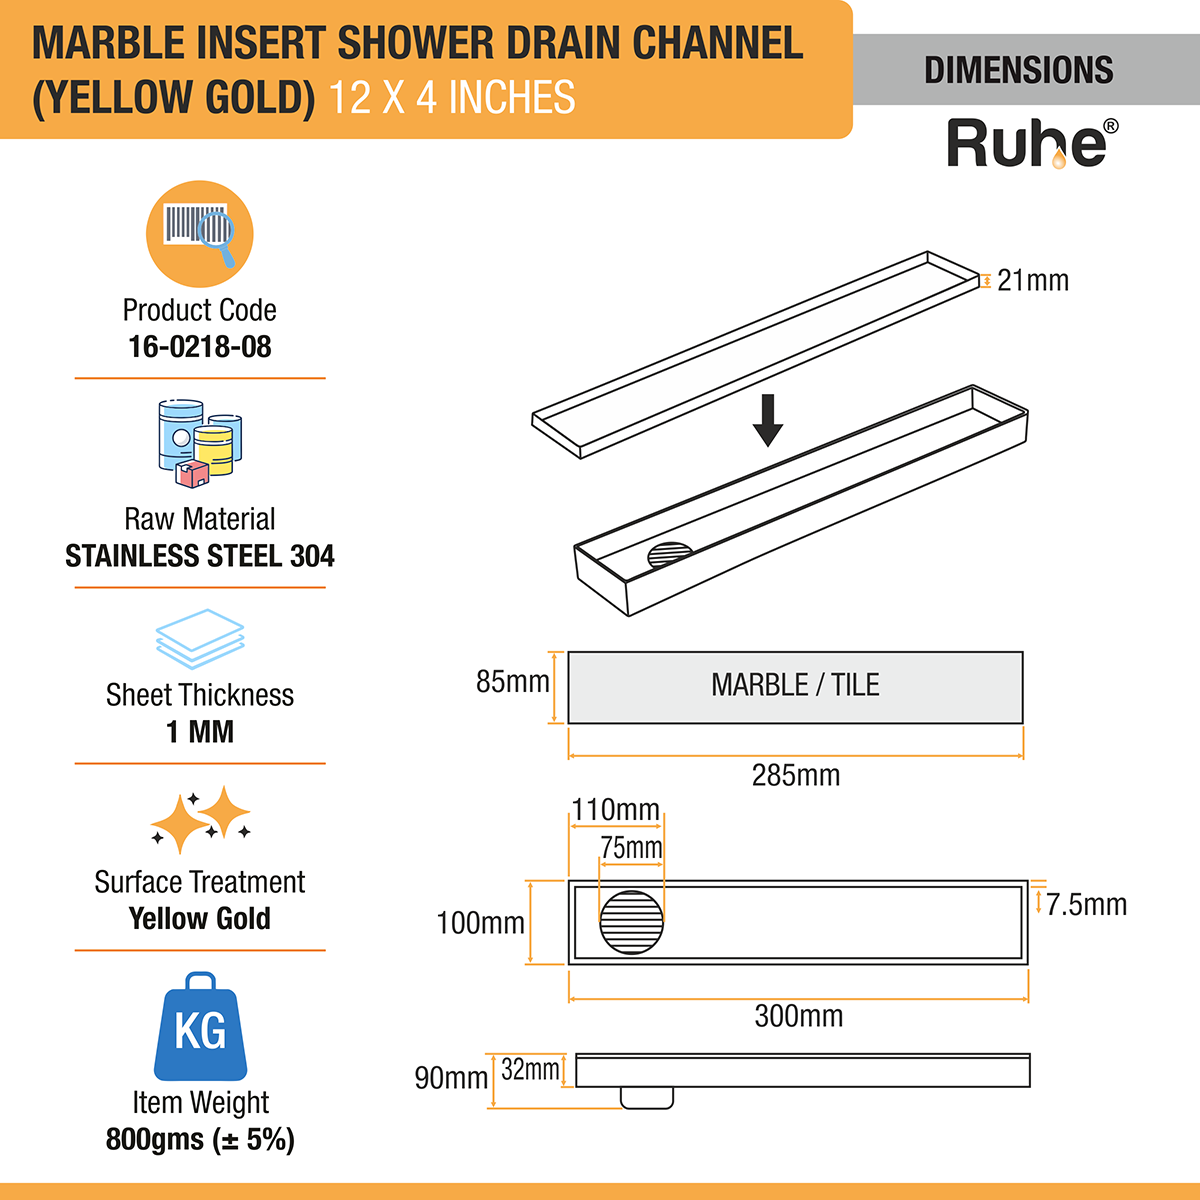 Marble Insert Shower Drain Channel (12 x 4 Inches) YELLOW GOLD PVD Coated dimensions and sizes